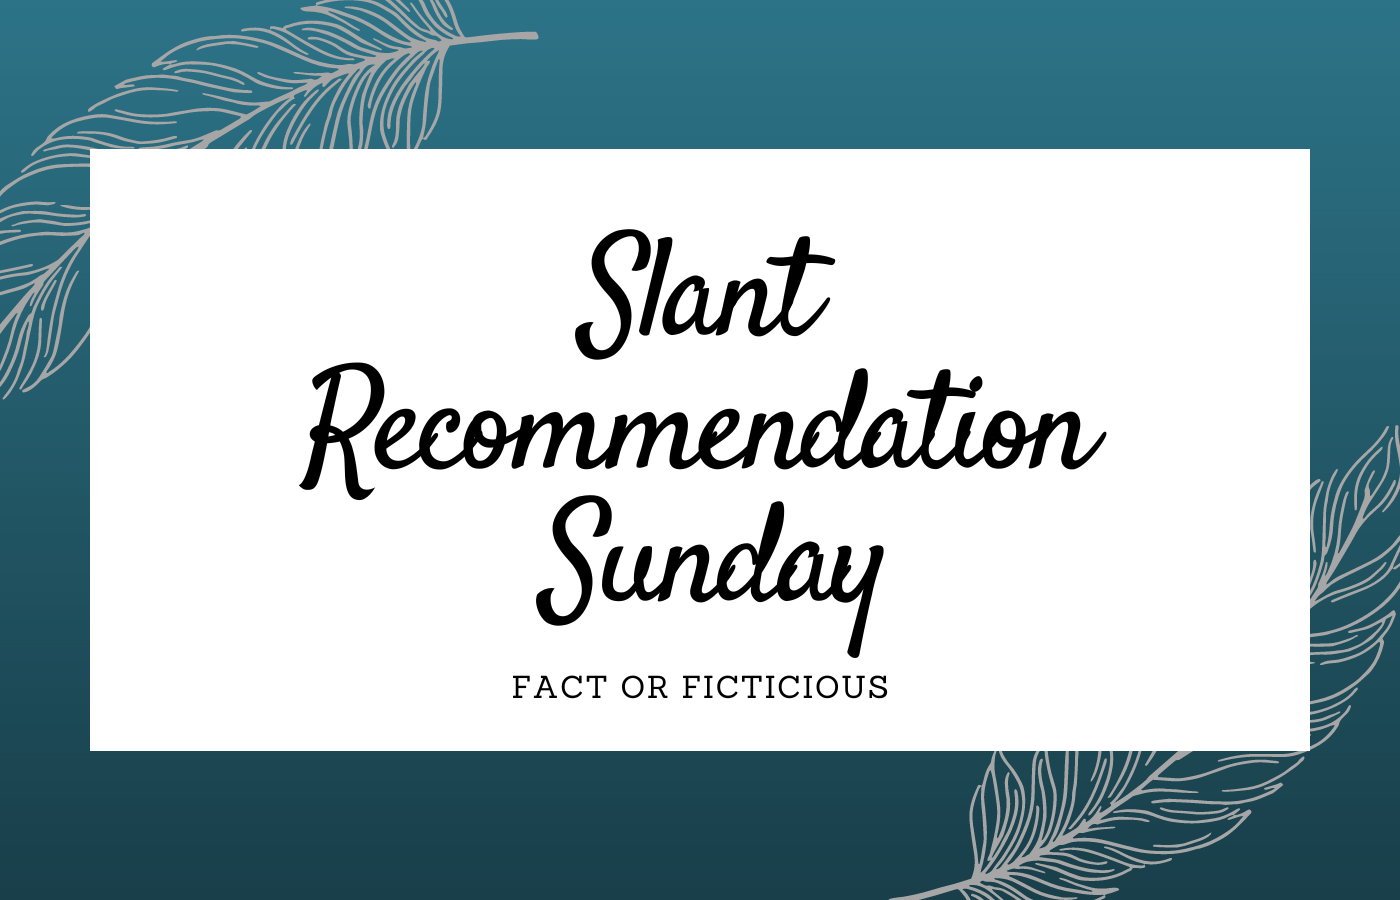 Slant Recommendation Sunday: Fact or Fictitious